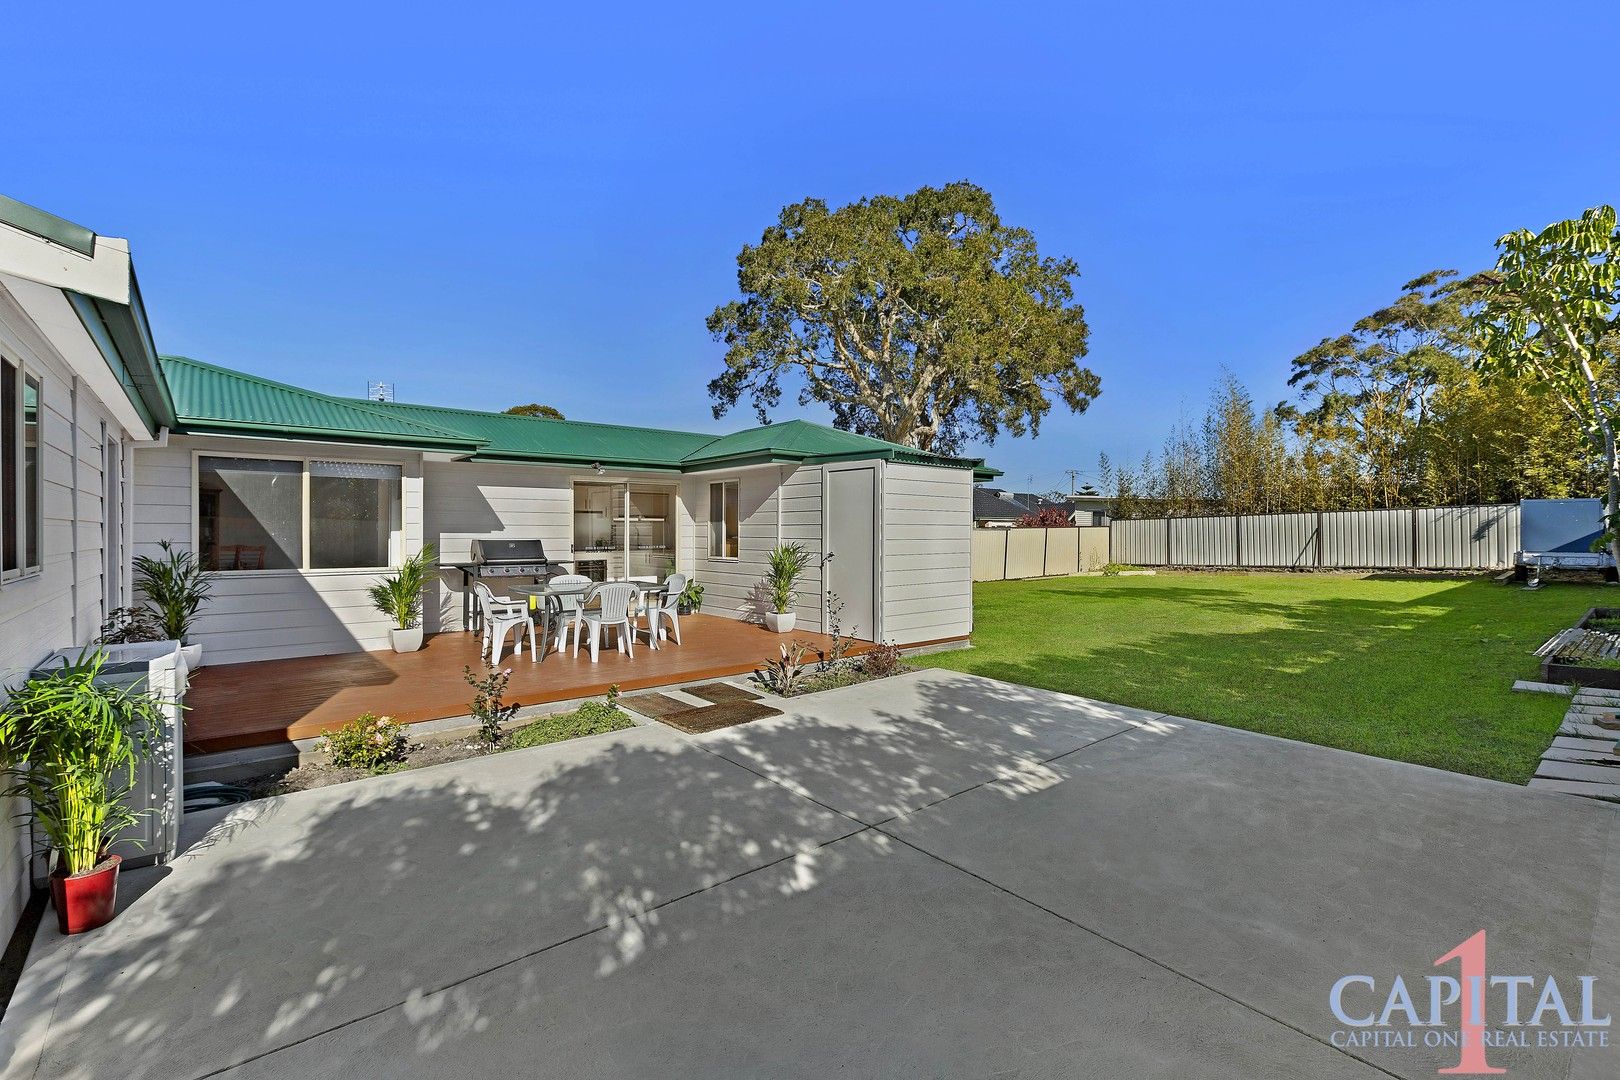 2 bedrooms House in 26 Fravent Street TOUKLEY NSW, 2263